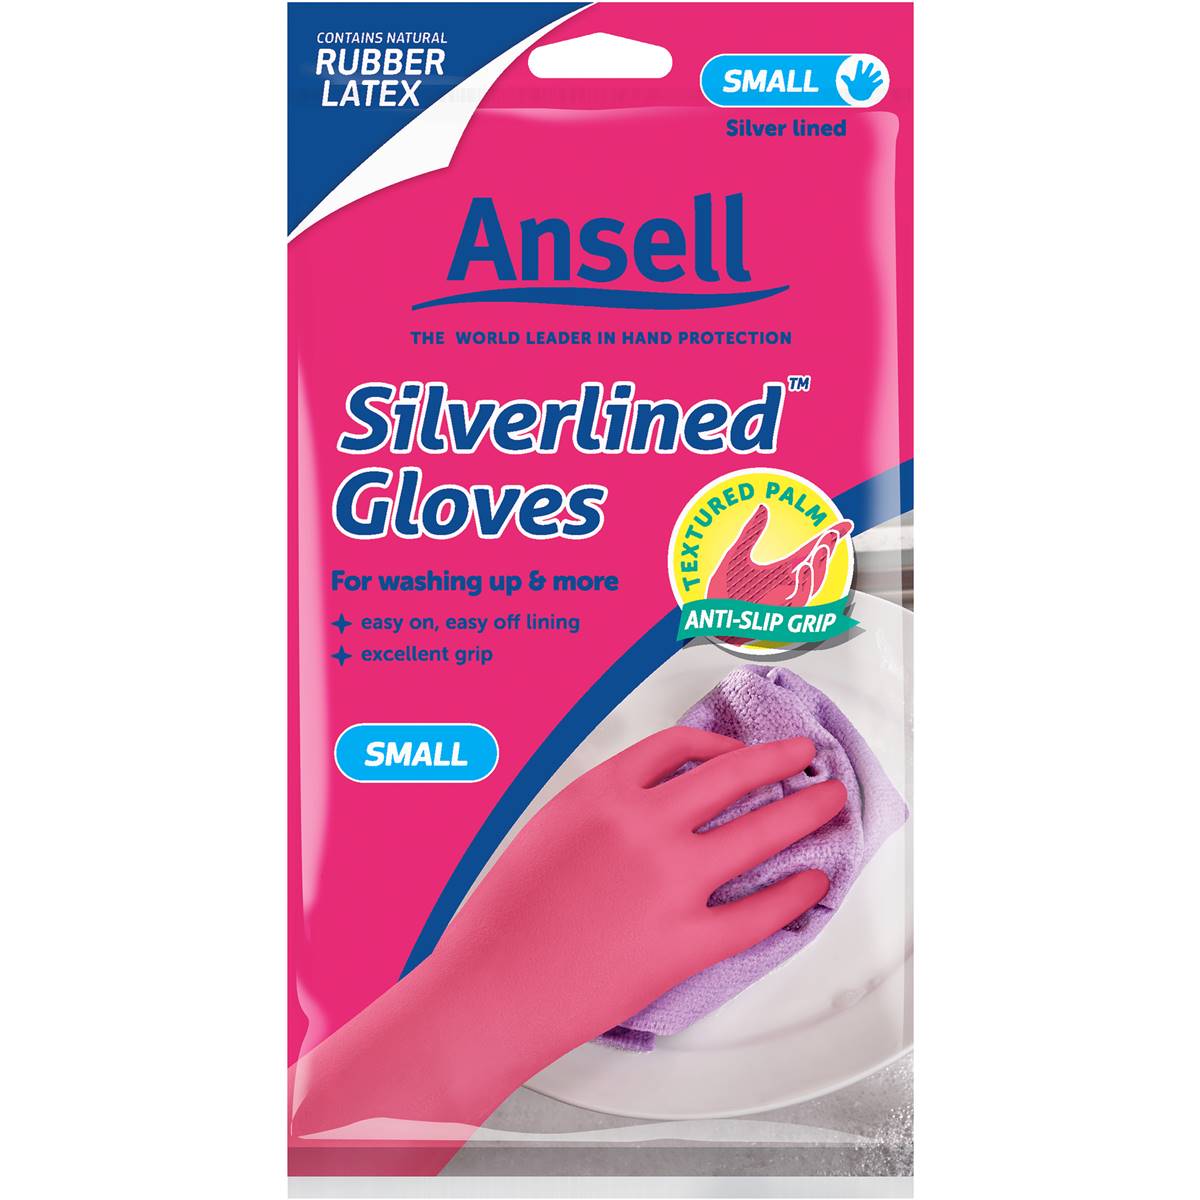 Ansell Silverlined Gloves Small